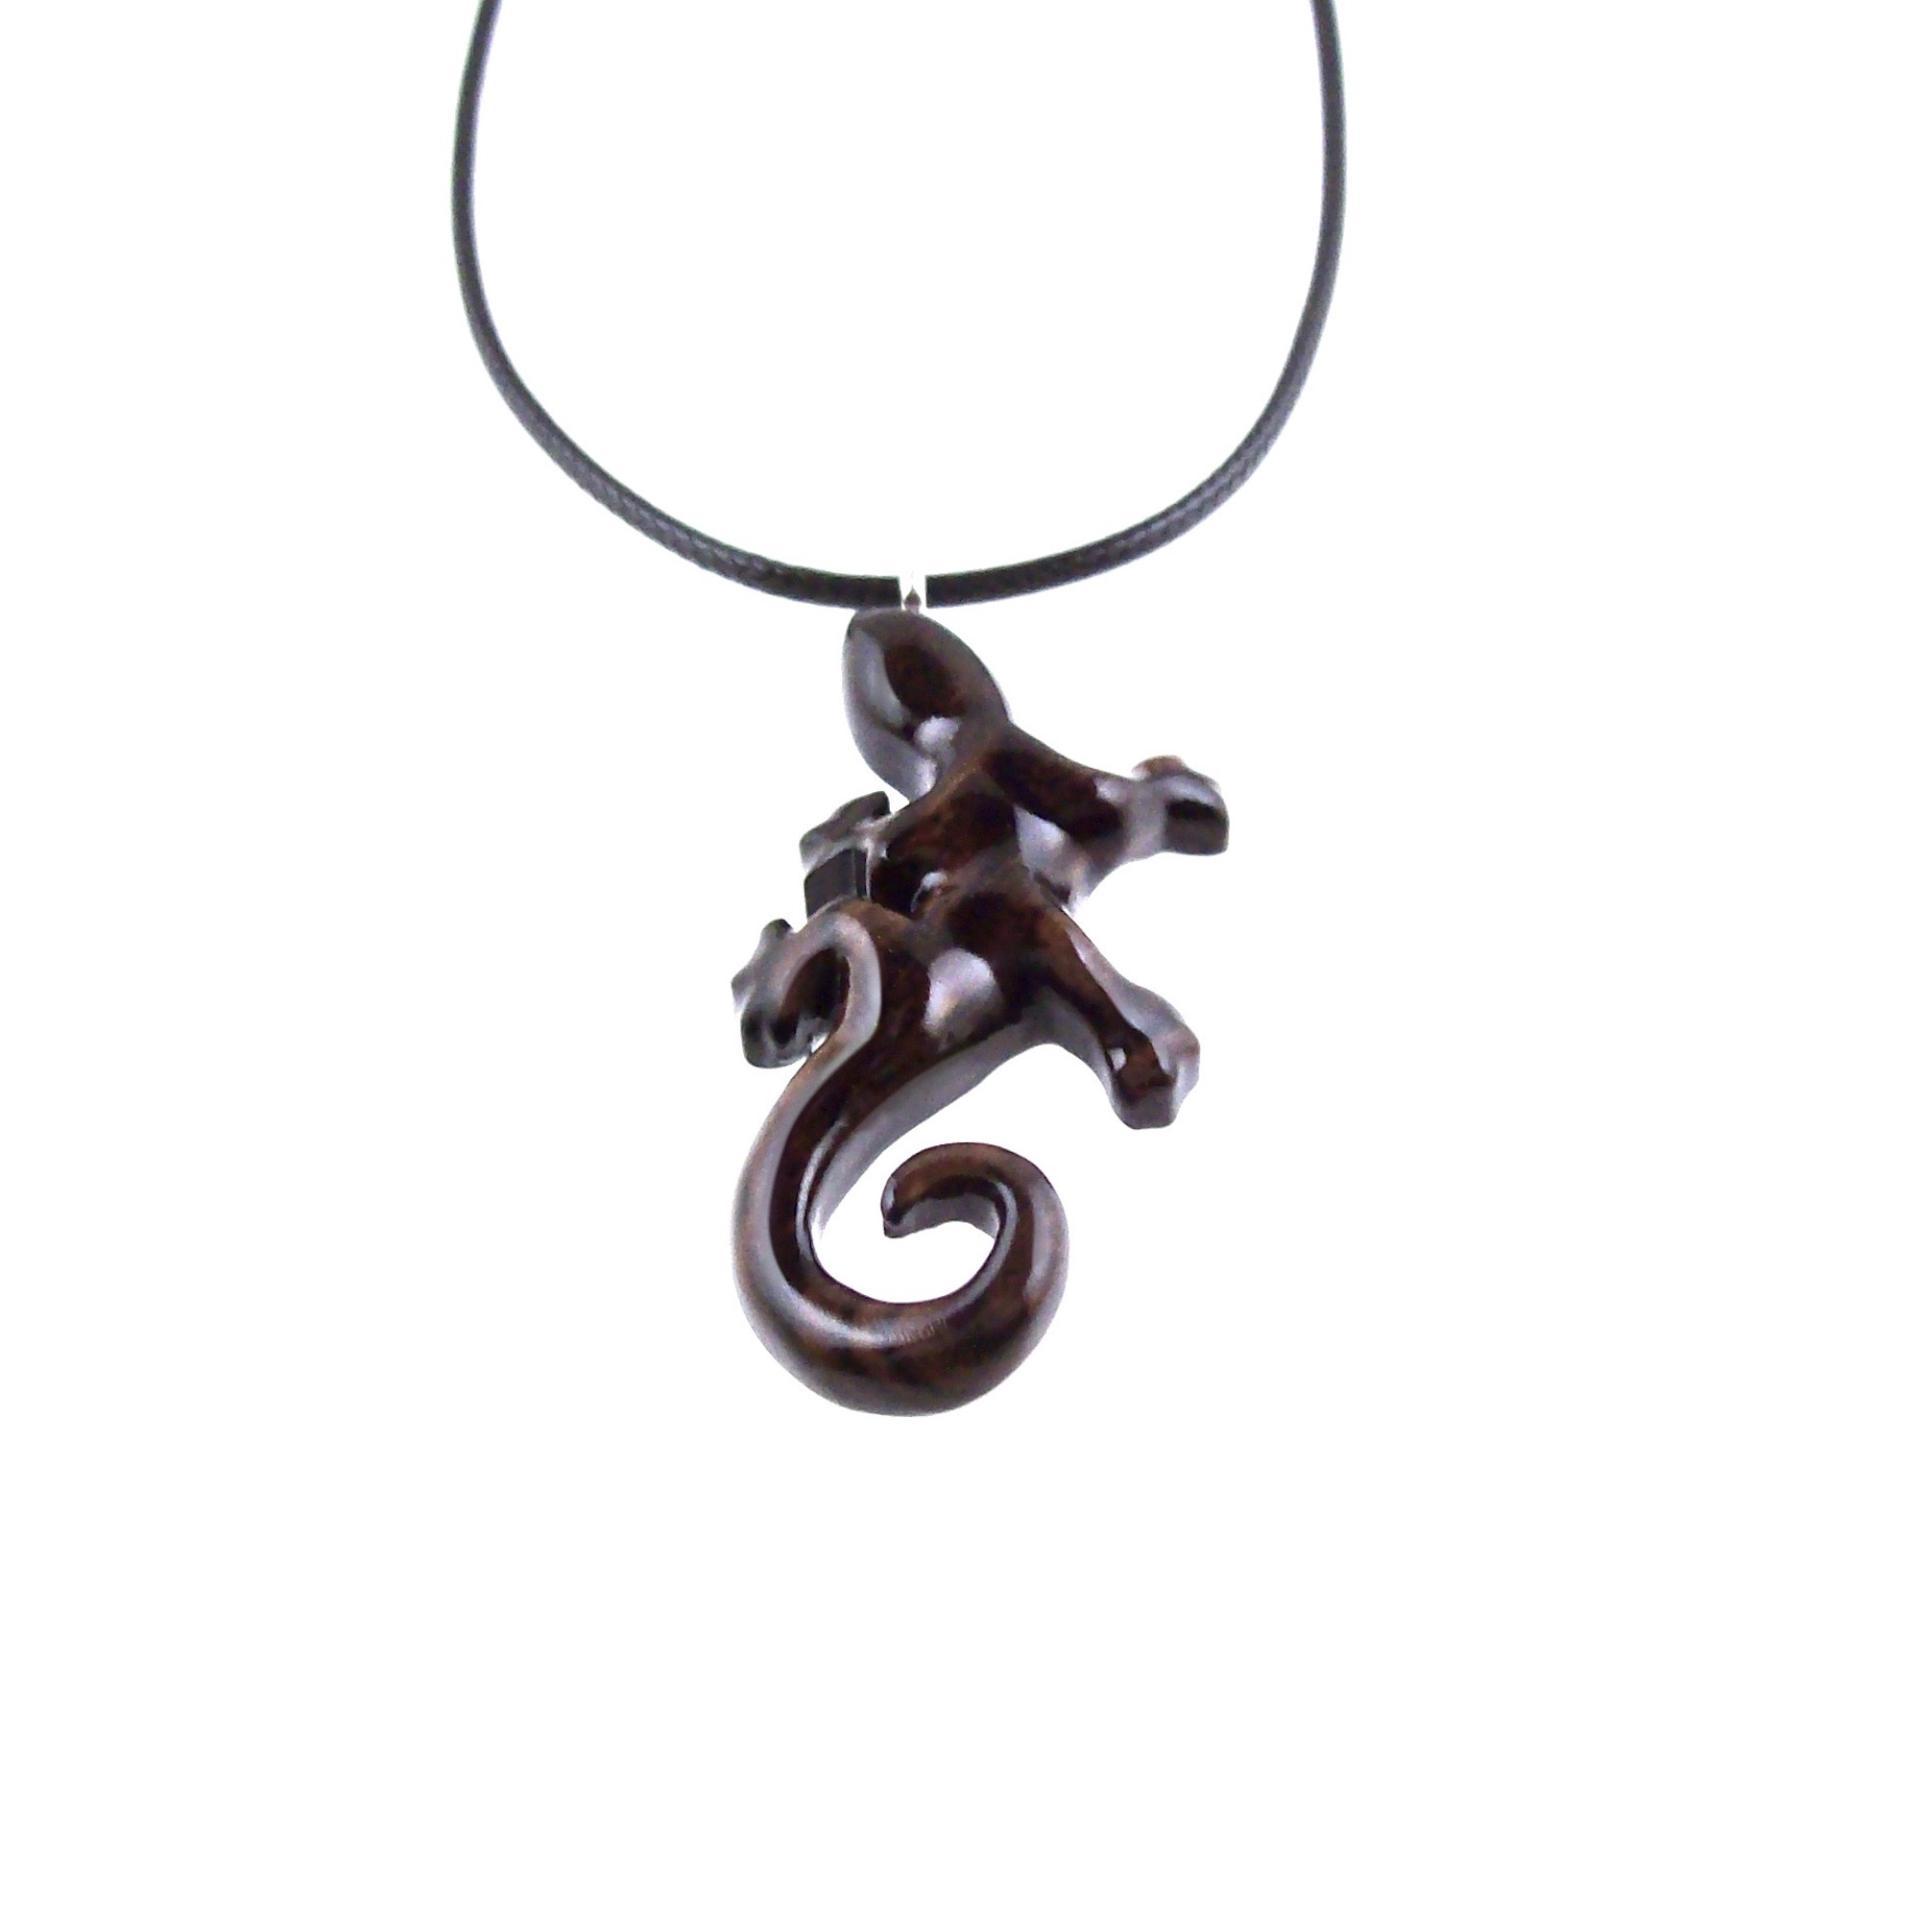 Gecko Pendant, Wooden Lizard Necklace, Hand Carved Wood Salamander Necklace, Totem Lizard Jewelry Gift for Men or Women